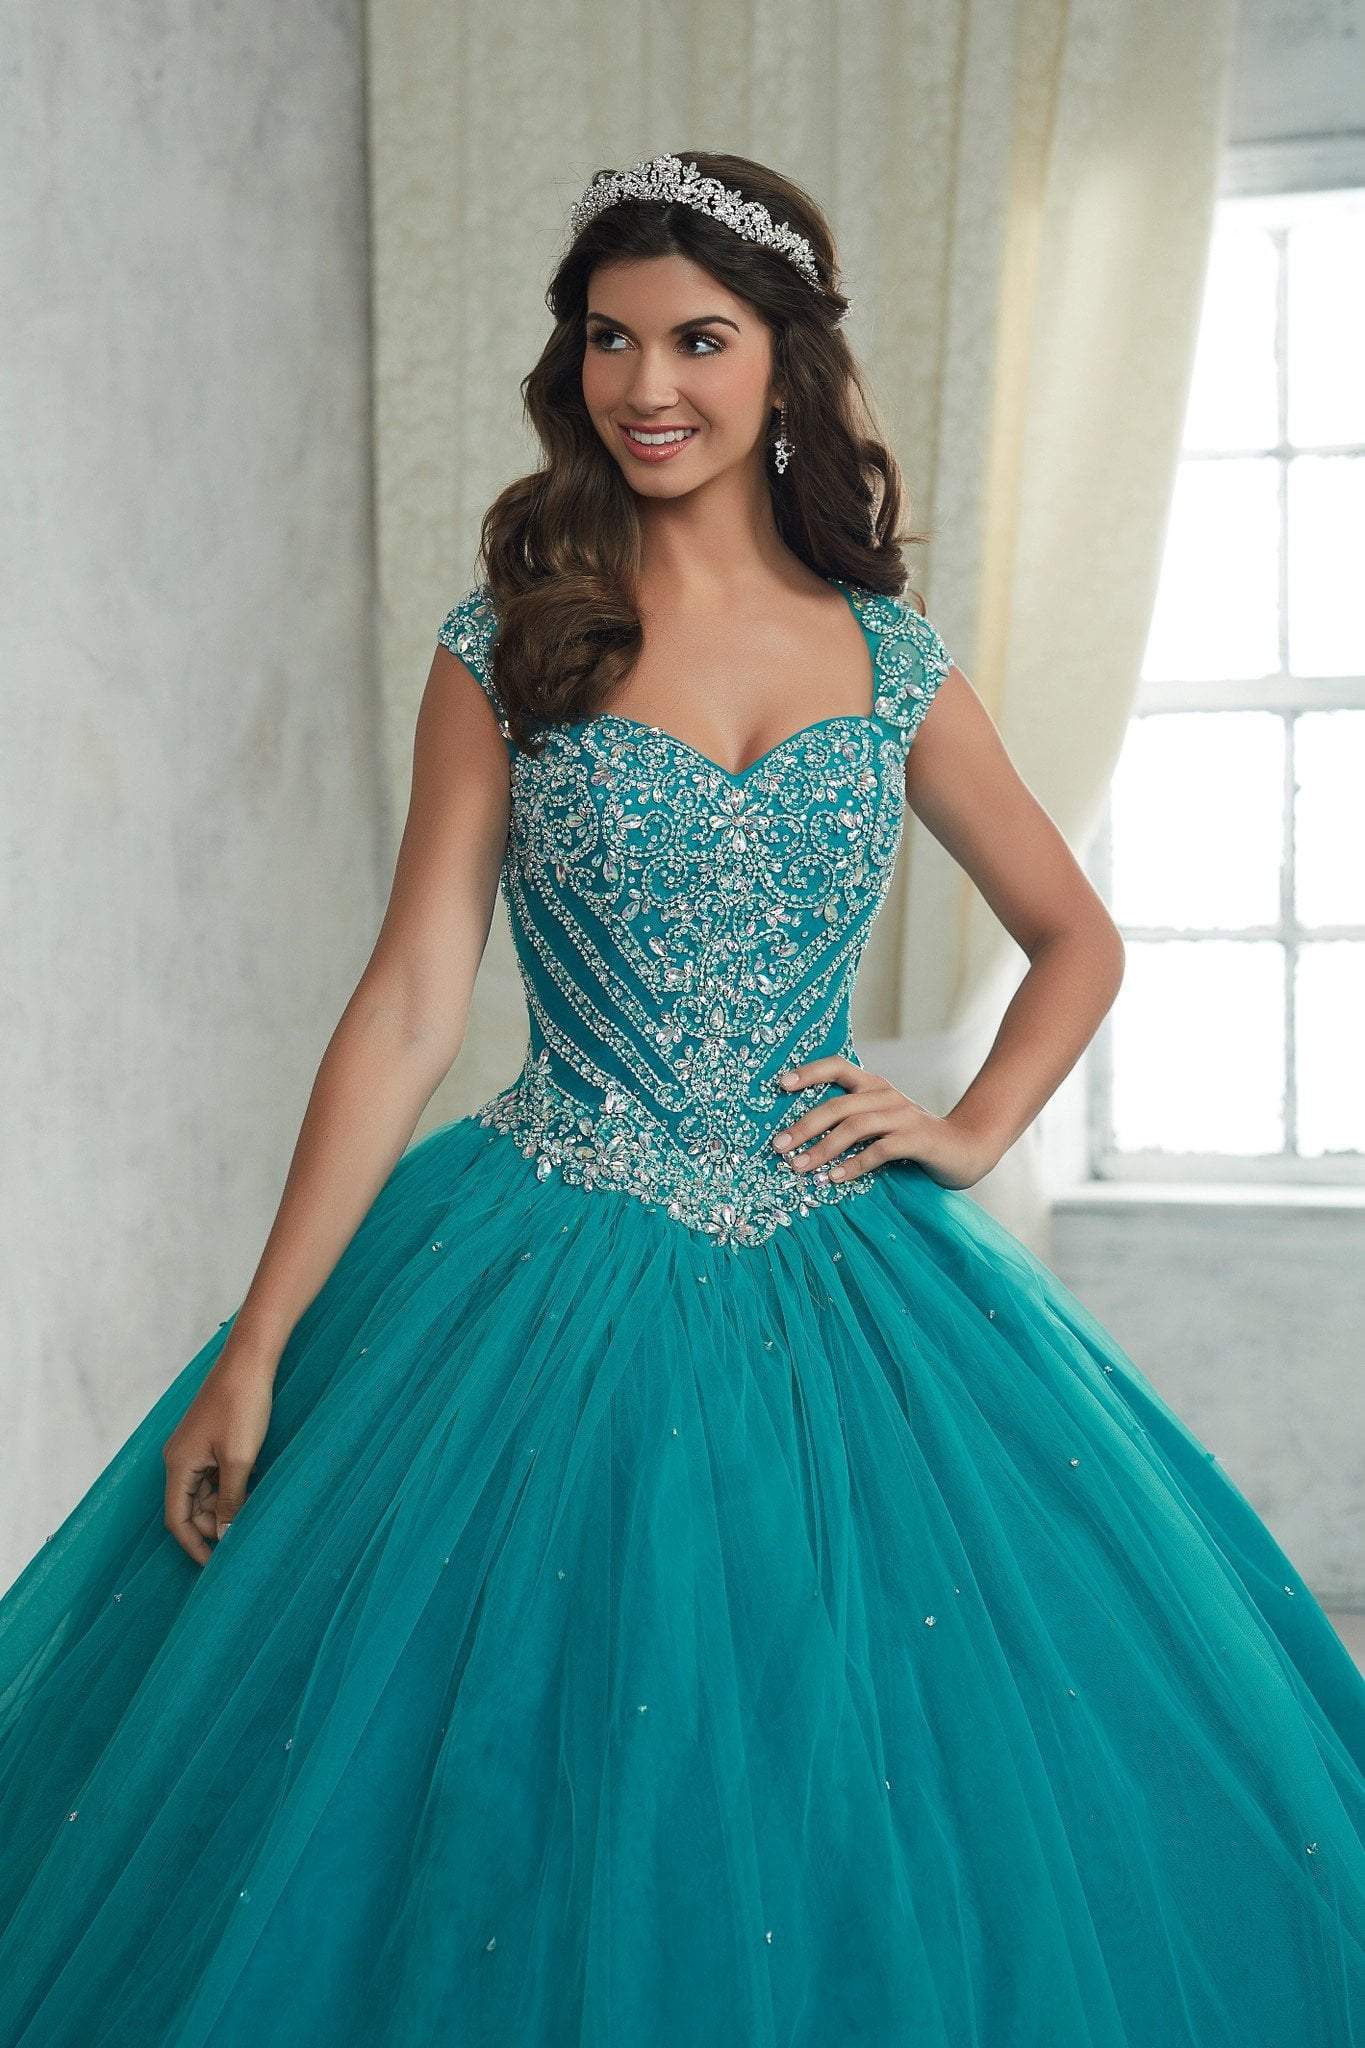 Fiesta Gowns - 56312SC Sweetheart Embellished Tulle Ballgown